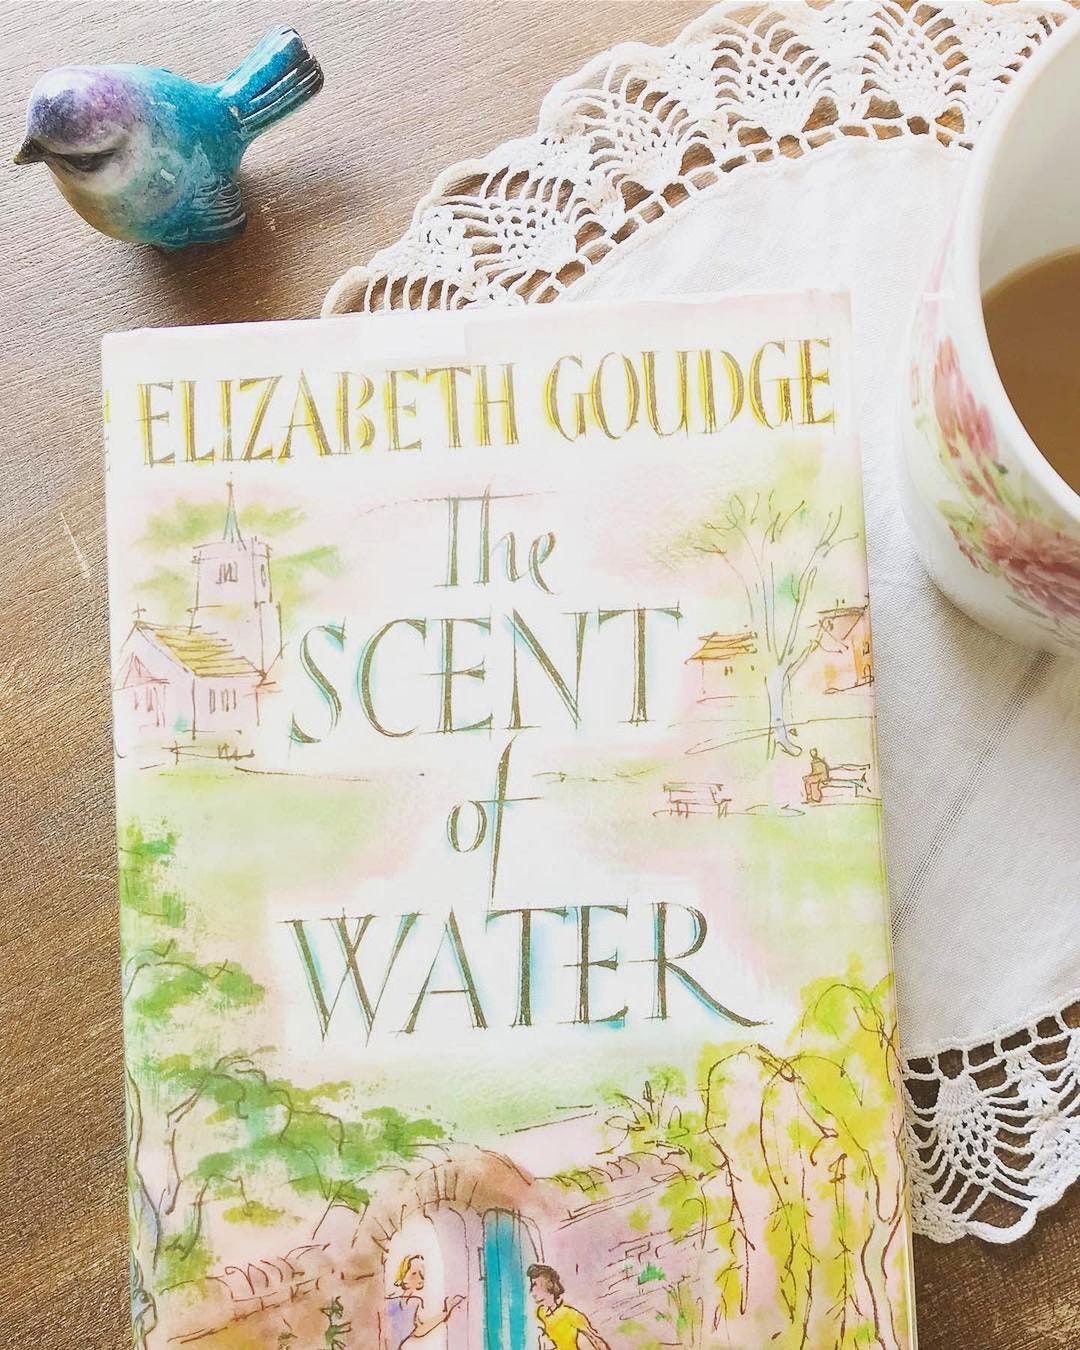 The Scent of Water by Elizabeth Goudge with my little bird and pineapple doily. 